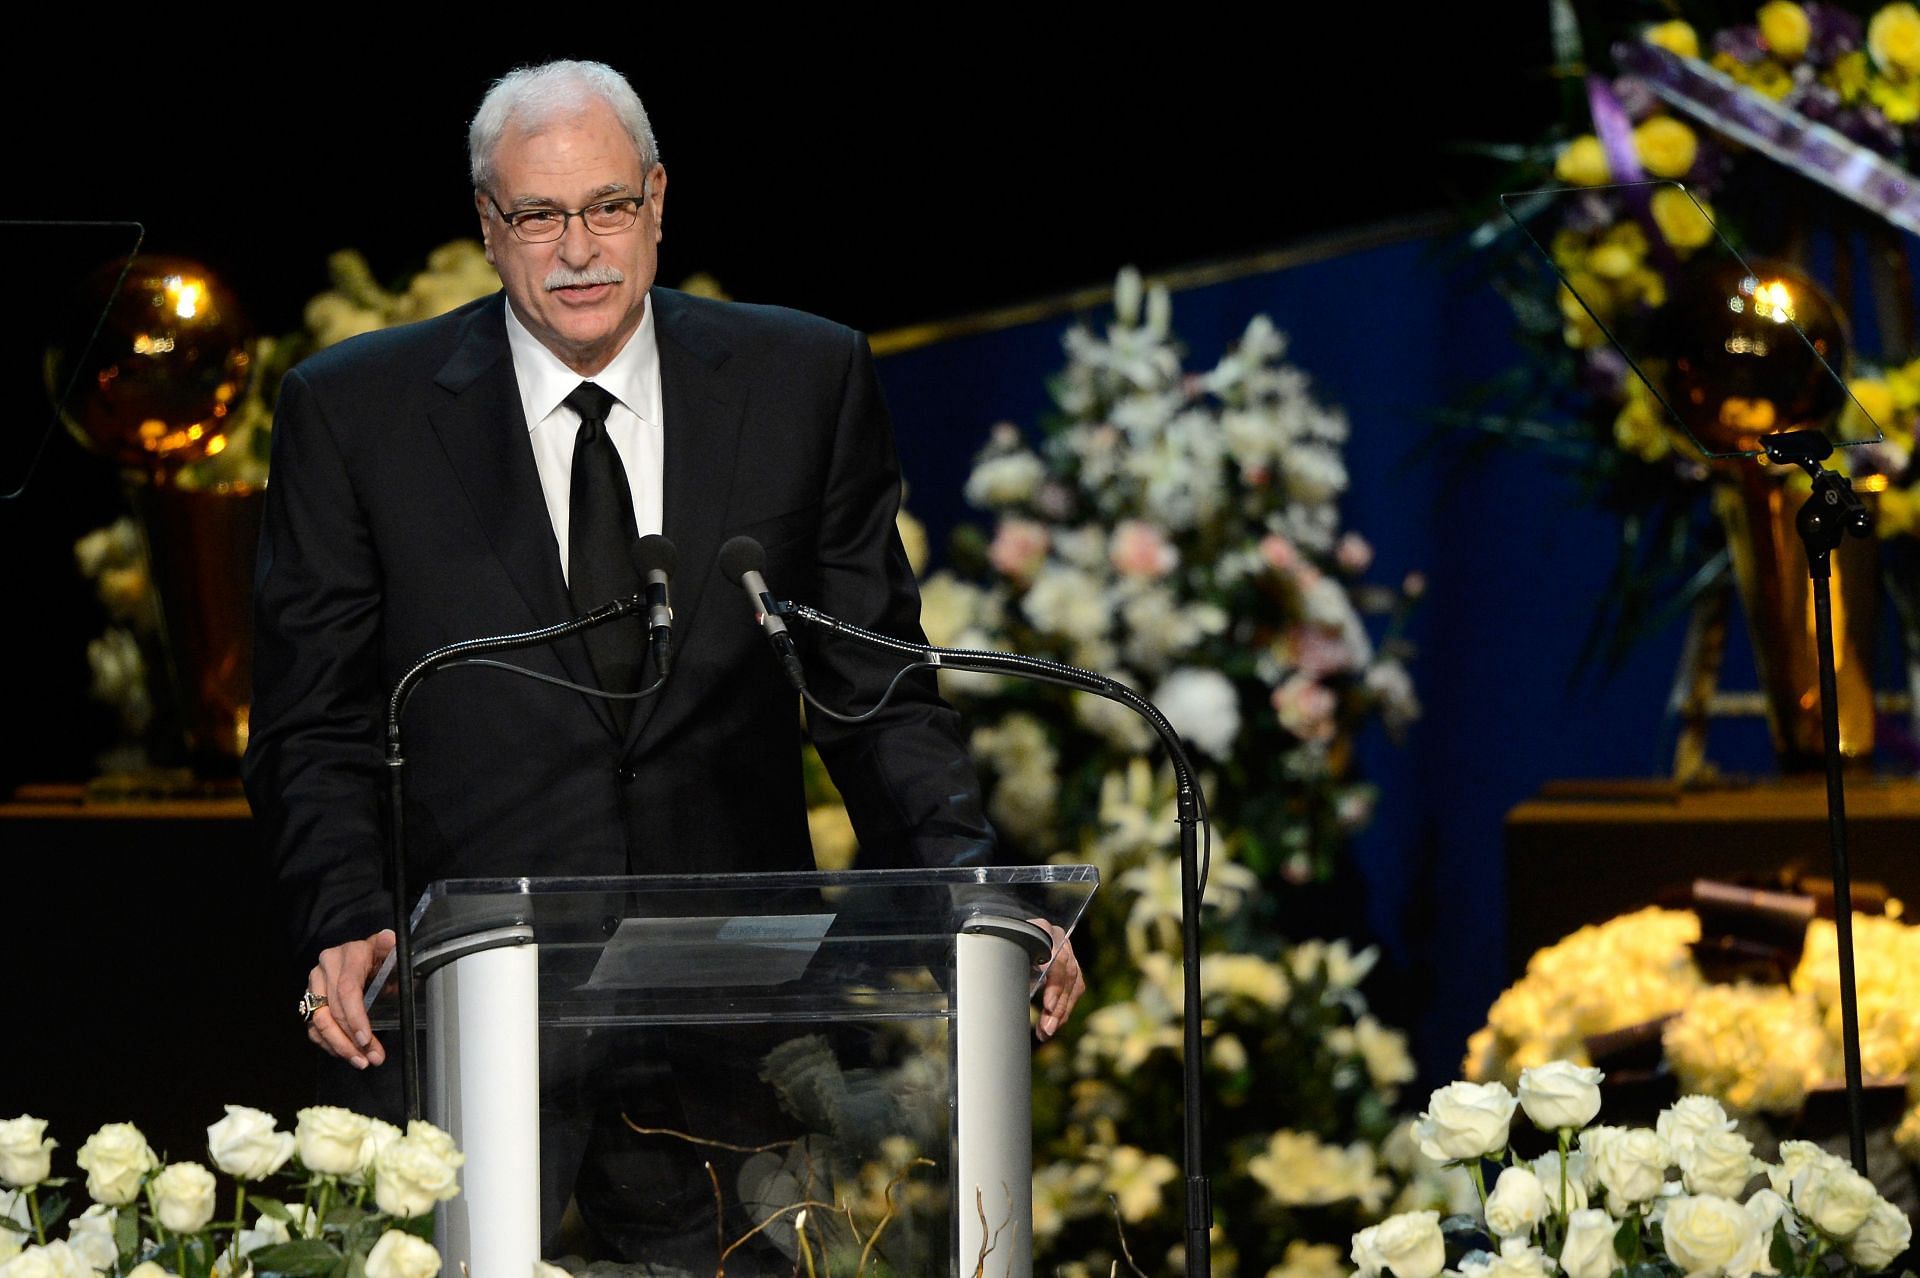 Memorial Service For <a href='https://www.sportskeeda.com/basketball/los-angeles-lakers'  target='_blank'  rel='noopener noreferrer'>Los Angeles Lakers</a>  Owner Dr.  Jerry Bus” src-low=”https://staticg.sportskeeda.com/editor/2023/01/1e148-16749791496364-1920.jpg” bad-src=”data:image/svg+xml,<svg%20xmlns=%22http://www.w3.org/2000/svg%22%20viewBox=%220%200%201920%201278%22></svg>“/><figcaption>Memorial Service For Los Angeles Lakers Owner Dr.  Jerry Bus</figcaption></figure>
<p>Phil Jackson is considered a successful head coach.  He has won 11 championships in his career, the first six with the Chicago Bulls and the last five with the Los Angeles Lakers.  His six finals victories with the Bulls included two three-peats.</p>
<p>Jackson was well-known for his distinct coaching style, which emphasized teamwork and mental toughness.  He is also known for his ability to bring out the best in his players and to instill a winning culture in them.</p>
<p>Most recently, Jackson served as president of the New York Knicks, for whom he also played.  However, Jackson was removed from the position in 2017.</p>
<h2>Pat Riley</h2>
<figure class=